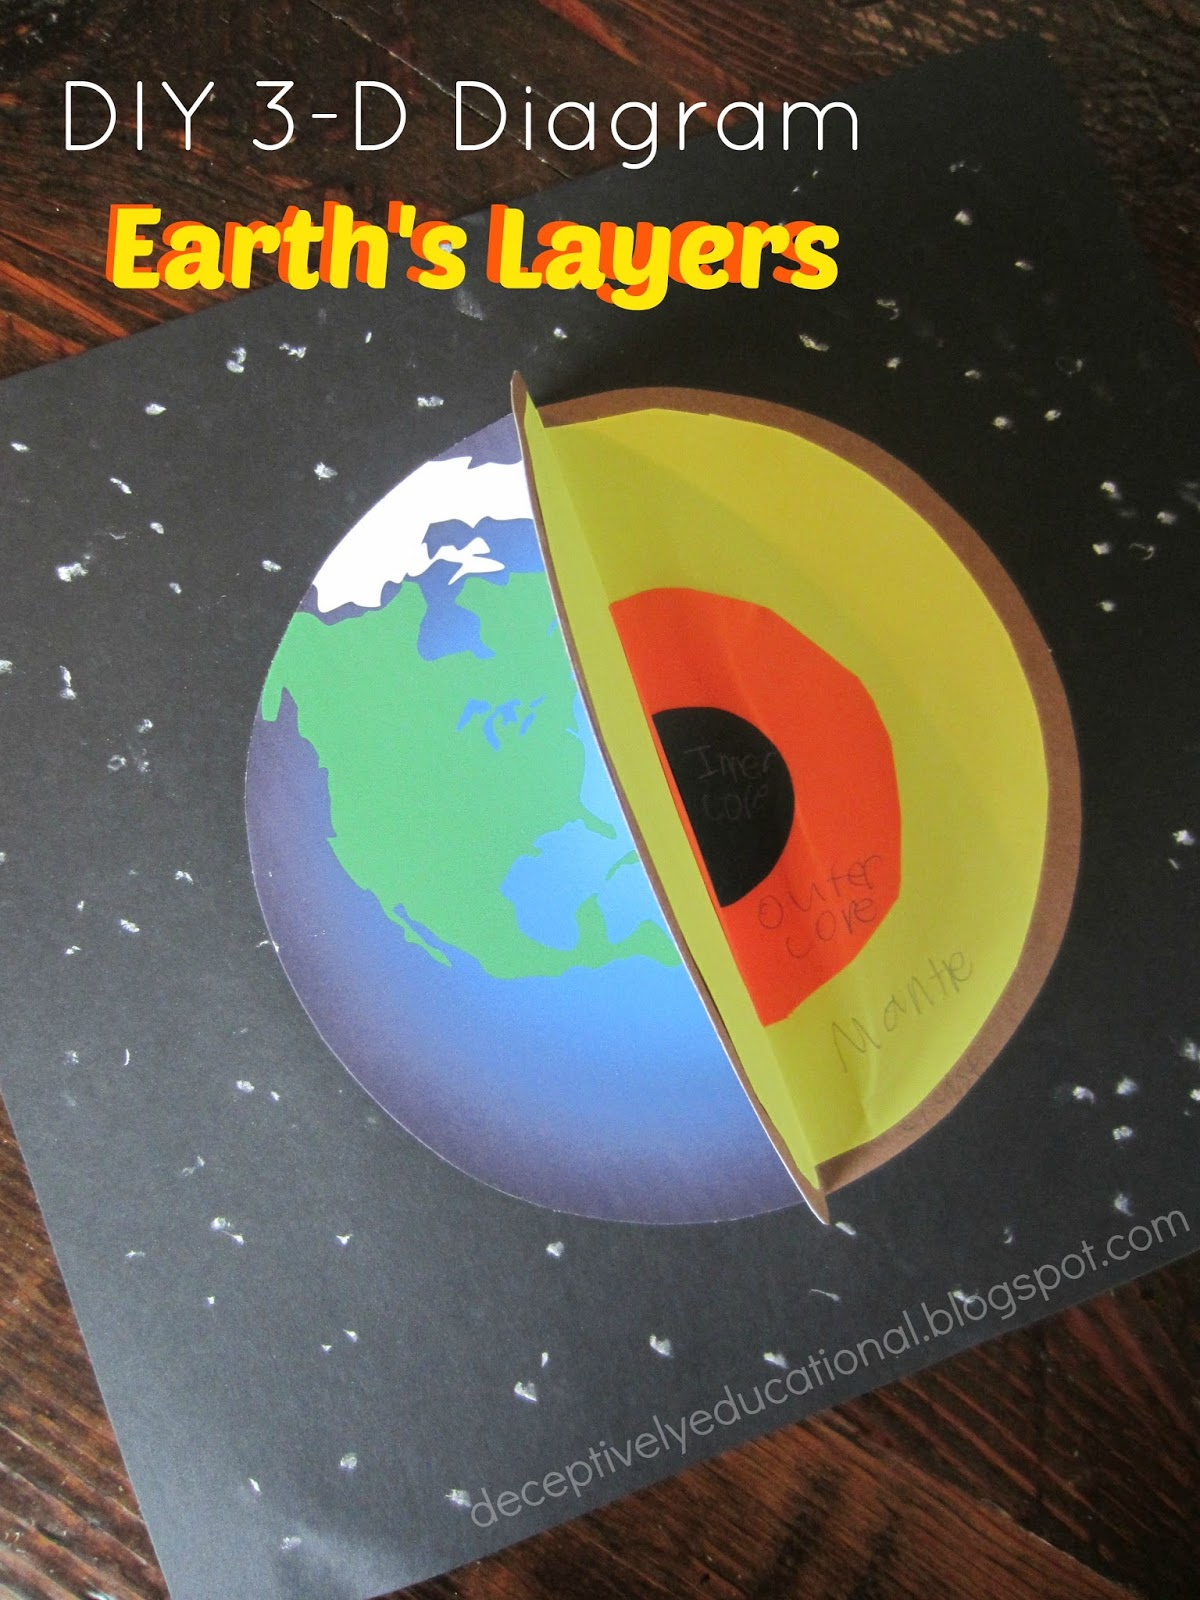 Diagram Of The Earth's Layers Relentlessly Fun Deceptively Educational Earths Layers Diy 3 D